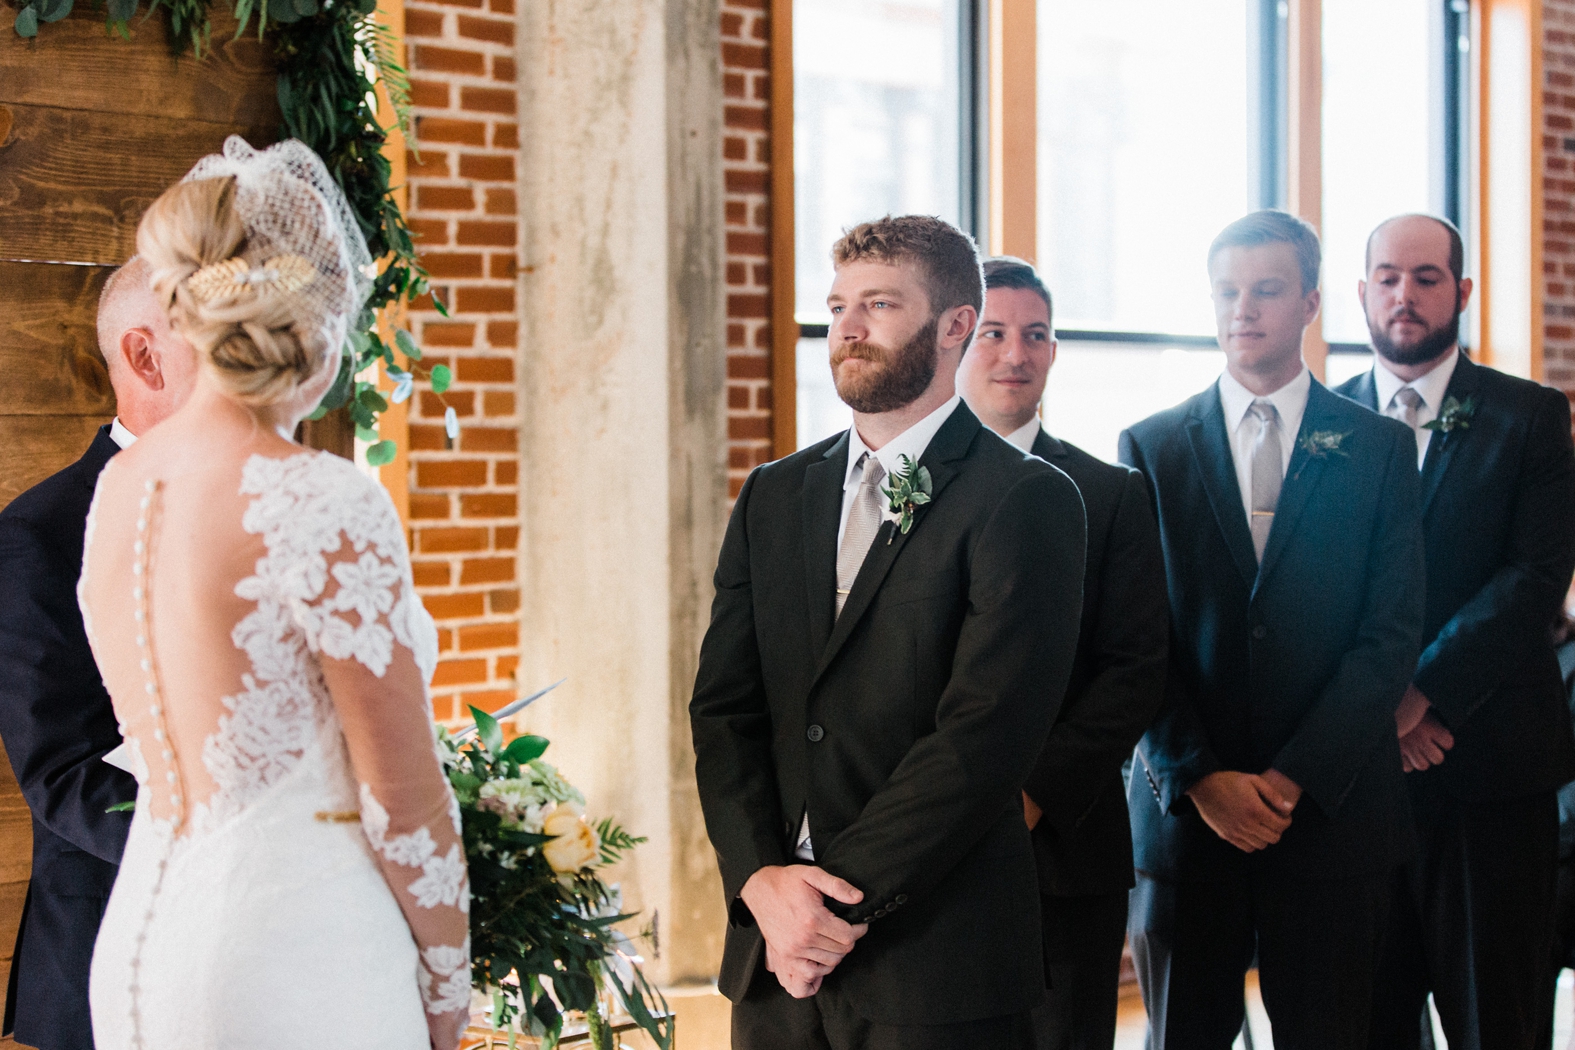 Wedding ceremony at Windows on Washington with wood backdrop with greenery. Bride in lace long sleeve wedding dress with buttons up back, birdcage veil, gold hairpiece. Groom in olive green suit with silver tie.